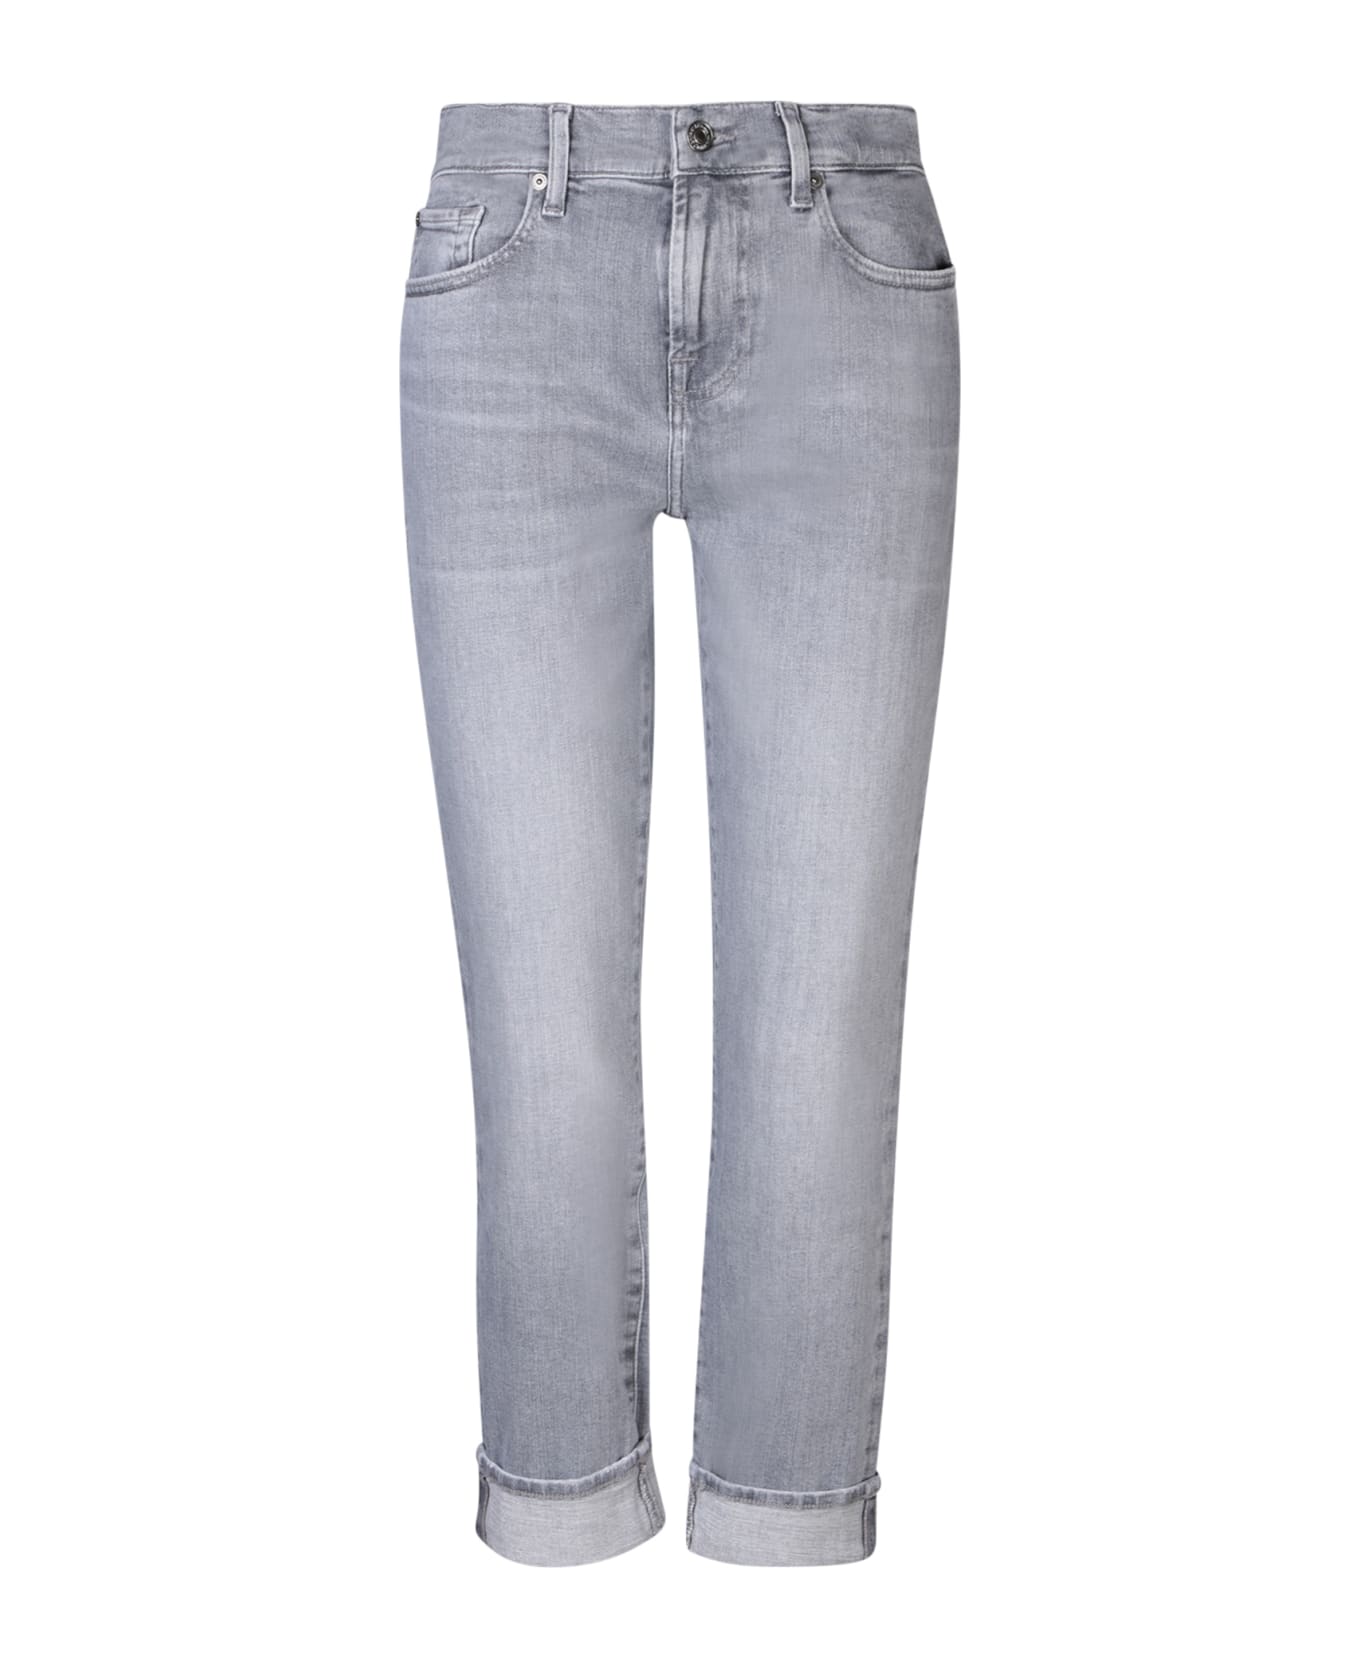 7 For All Mankind Relaxed Skinny Grey Jeans - Grey